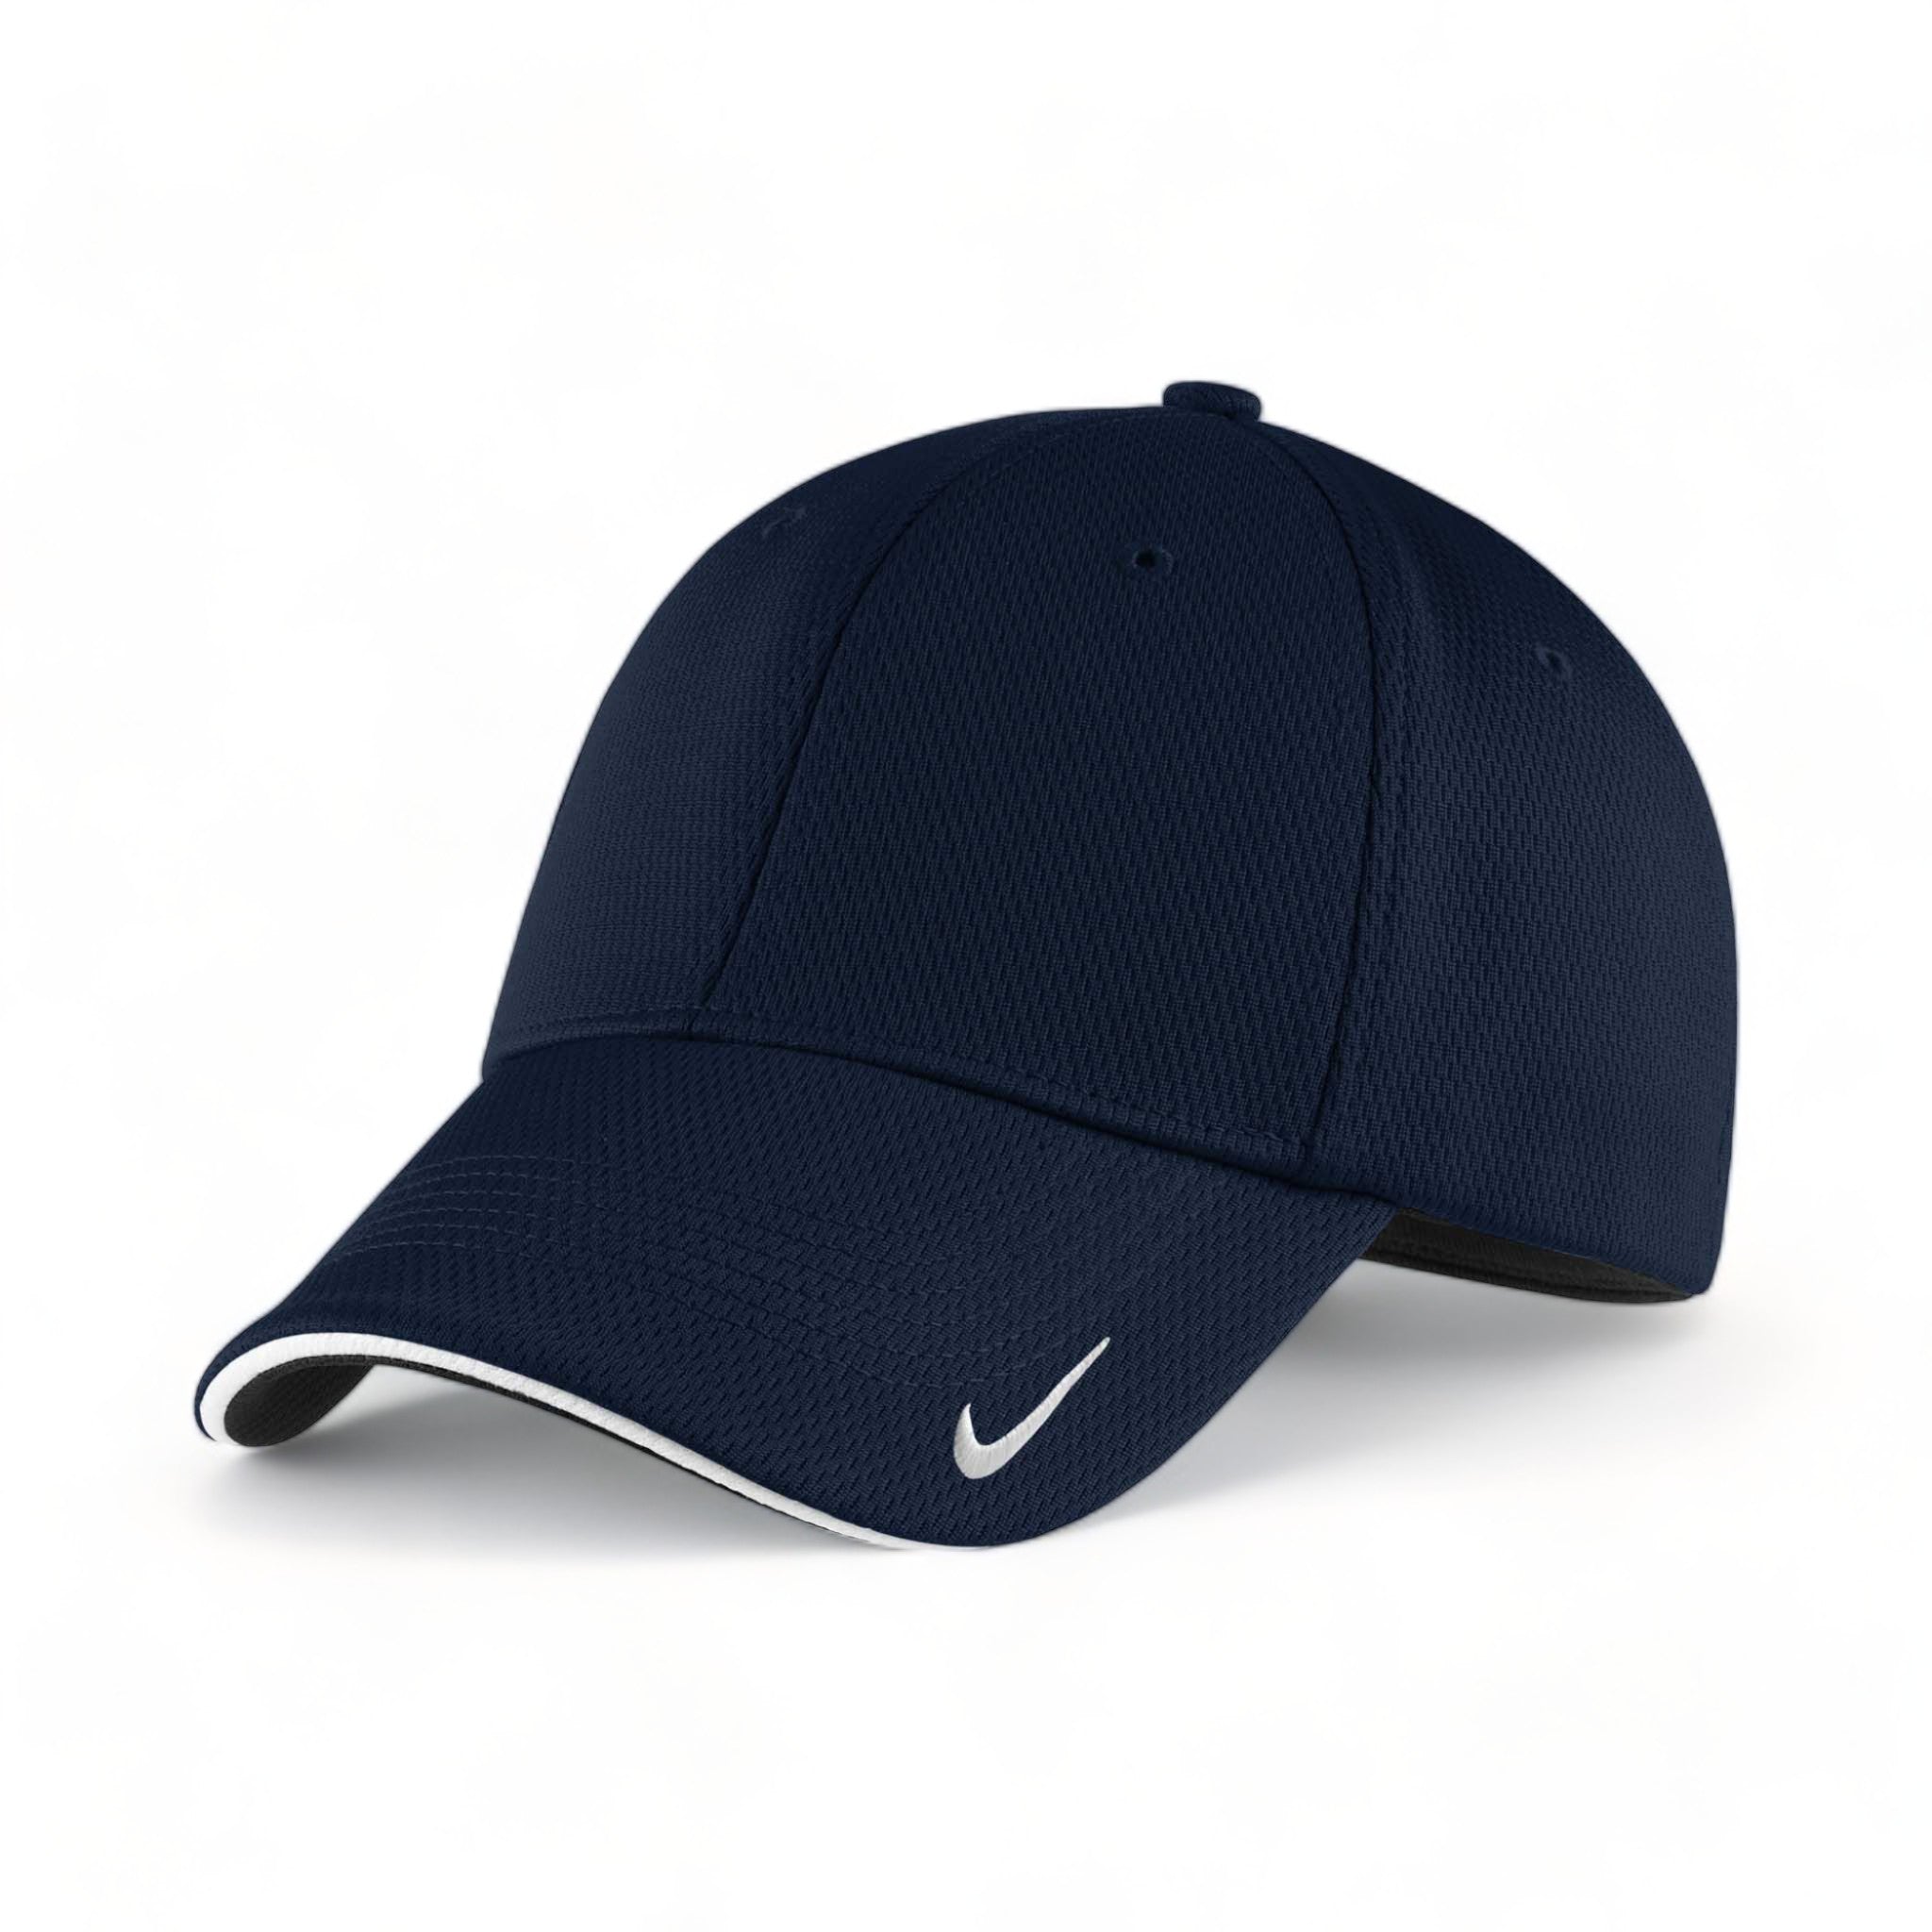 Side view of Nike NKFD9718 custom hat in navy and white